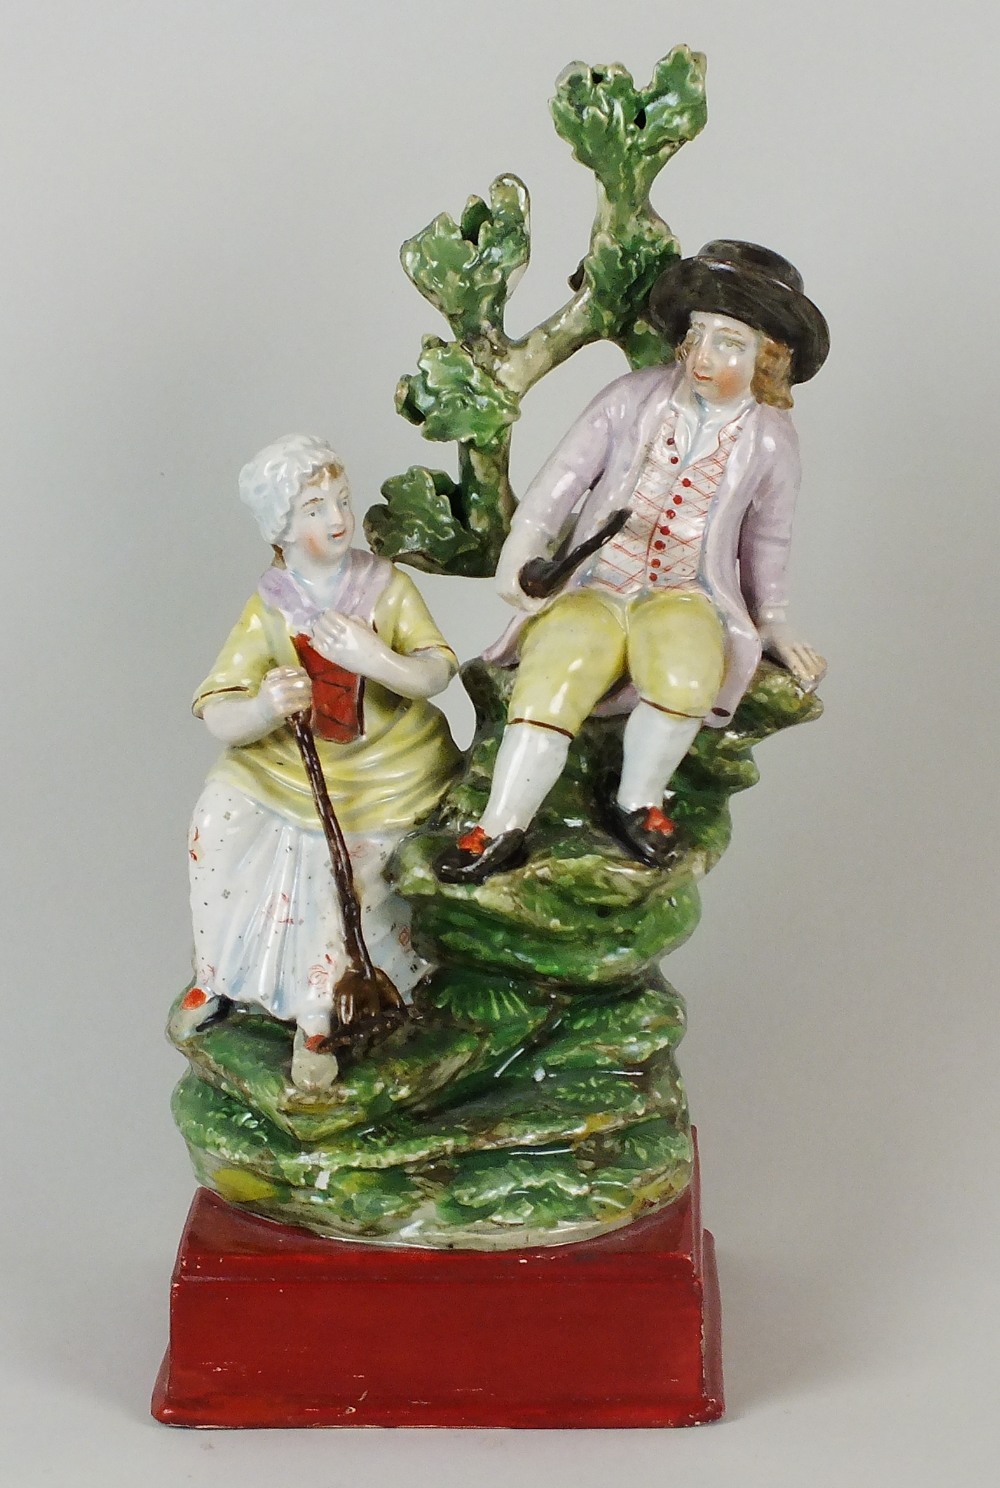 An early Staffordshire pearlware figural group, circa 1780-1800, modelled as male and female